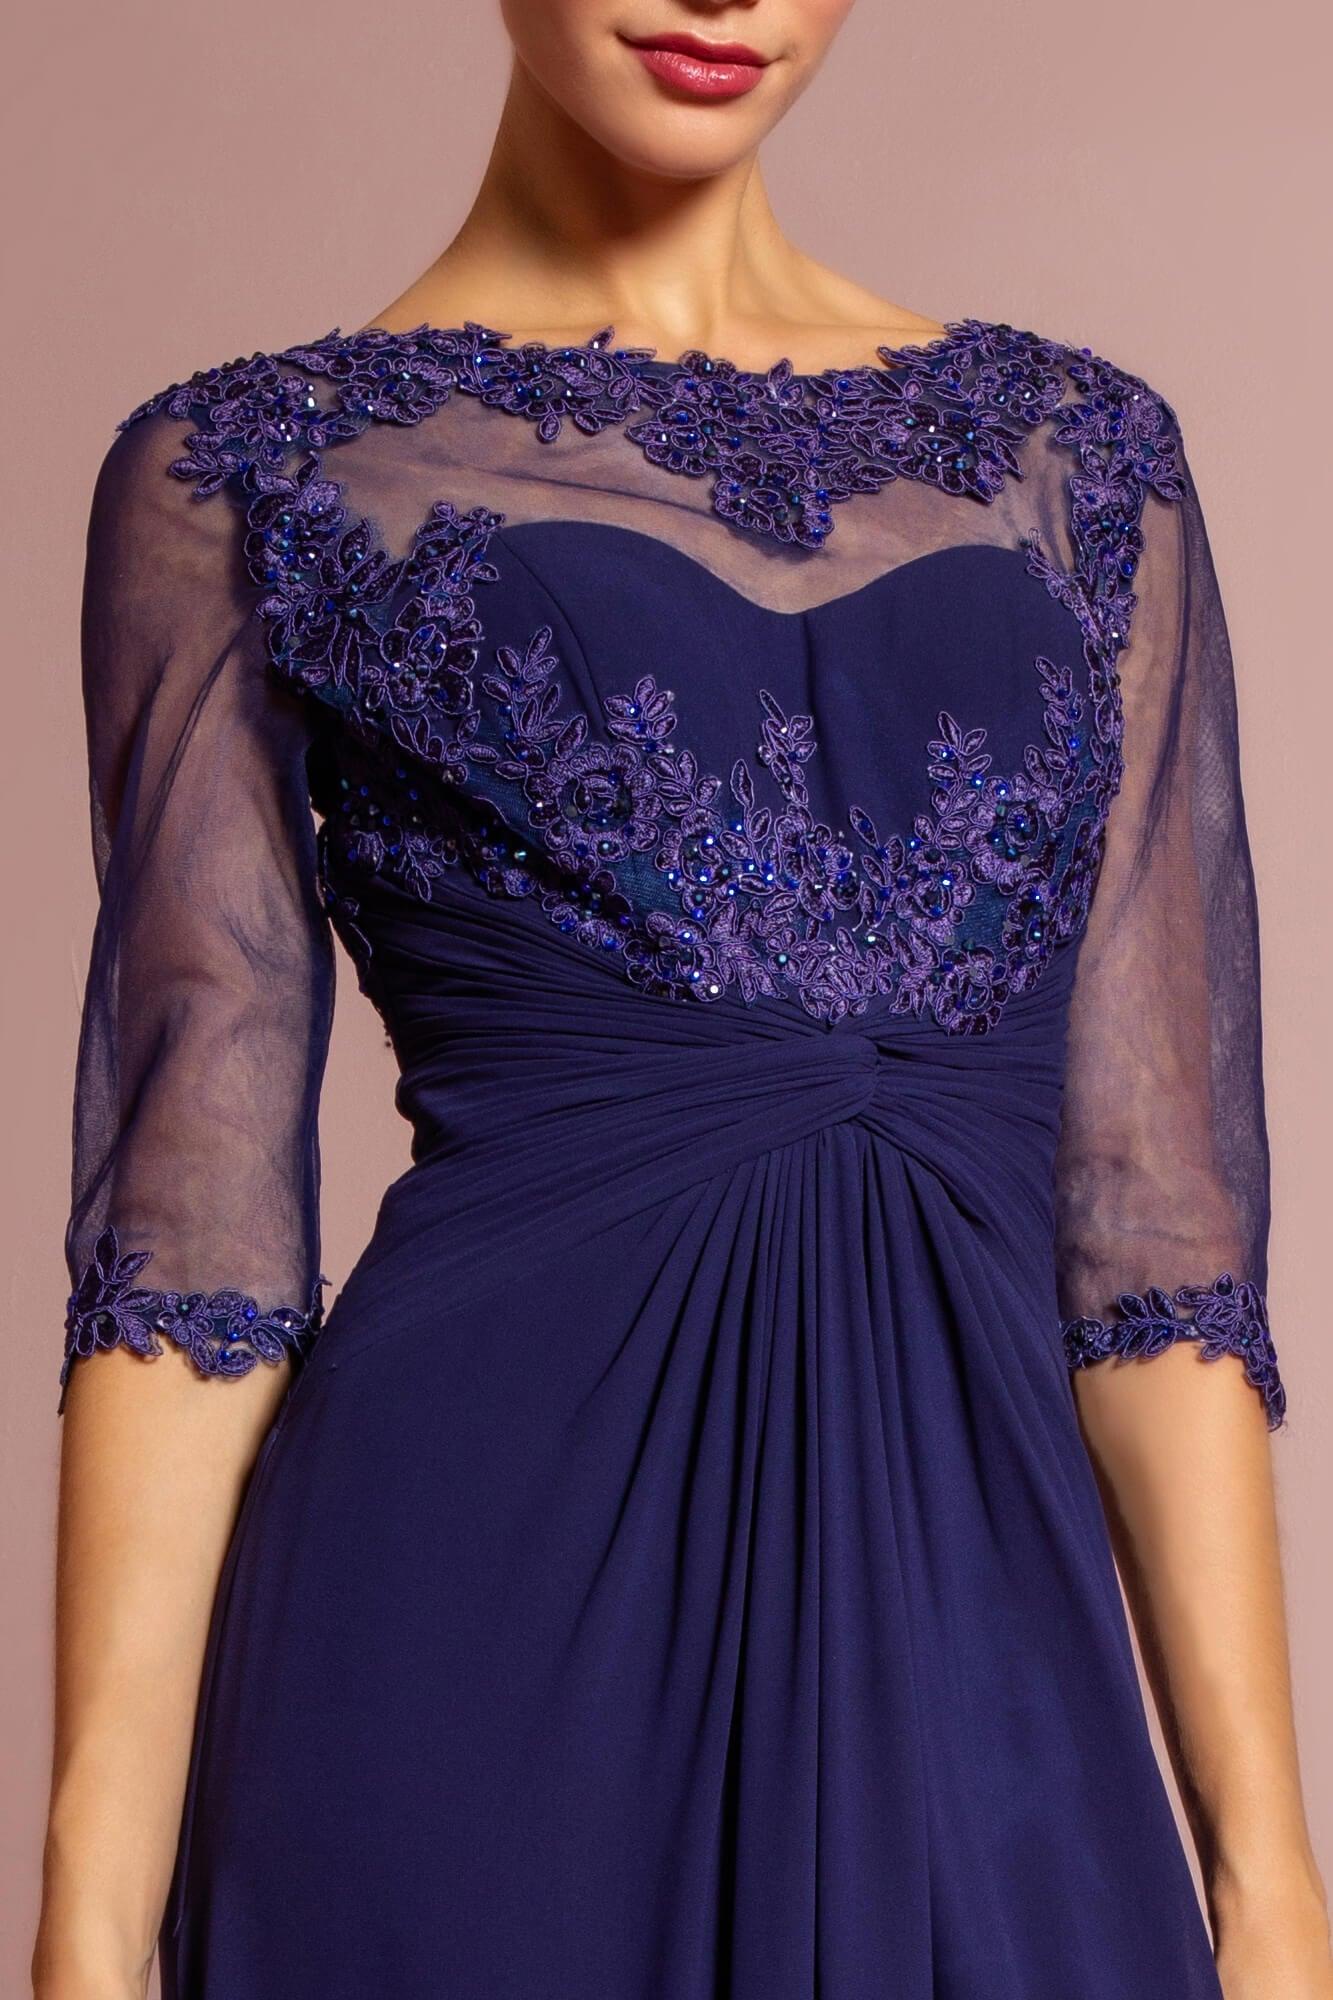 Chiffon Long Mother of the Bride Dress Formal Navy